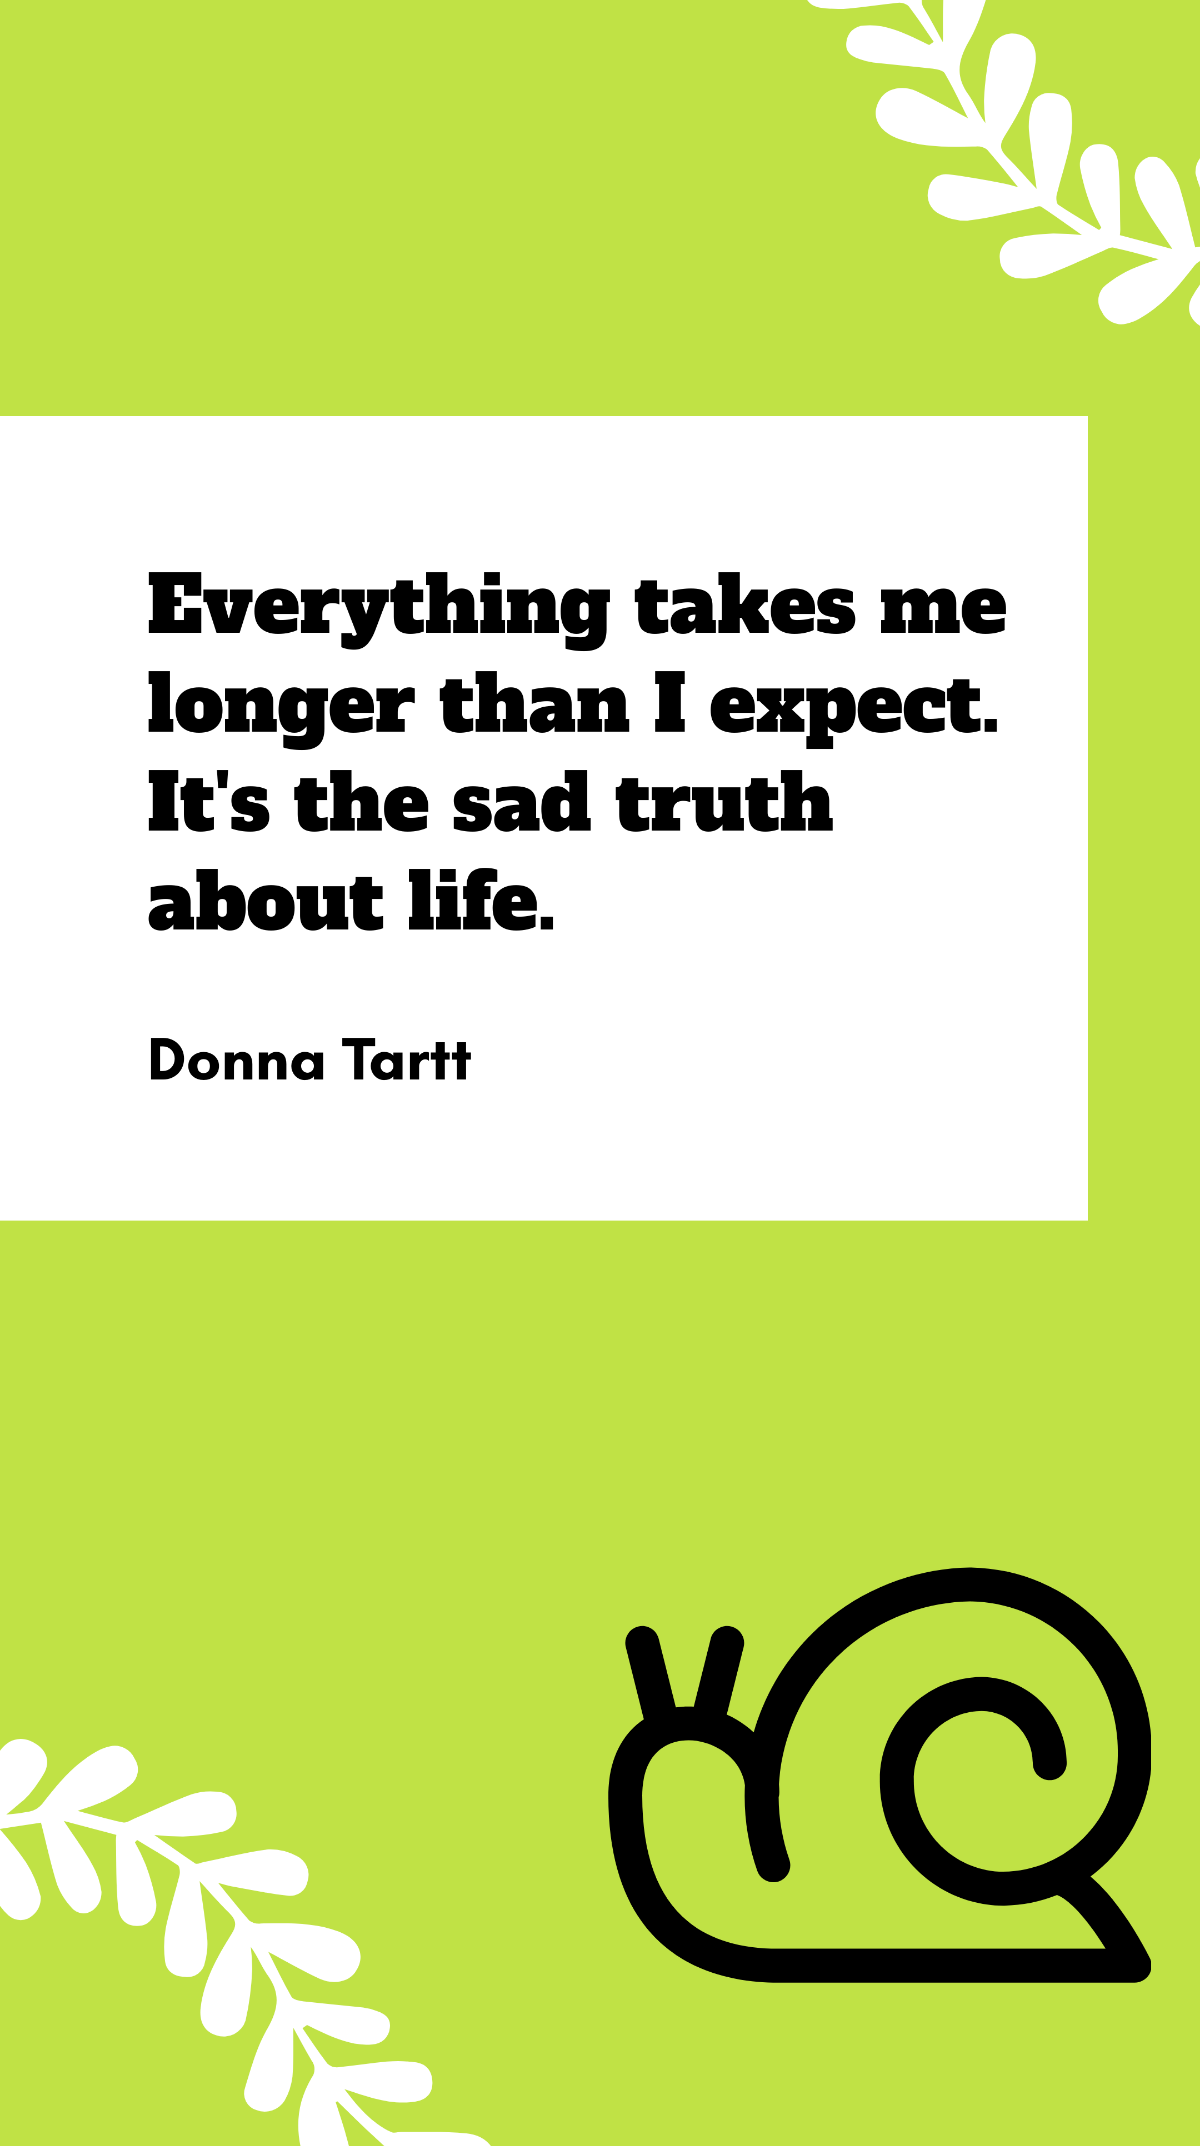 Donna Tartt - Everything takes me longer than I expect. It's the sad truth about life. Template